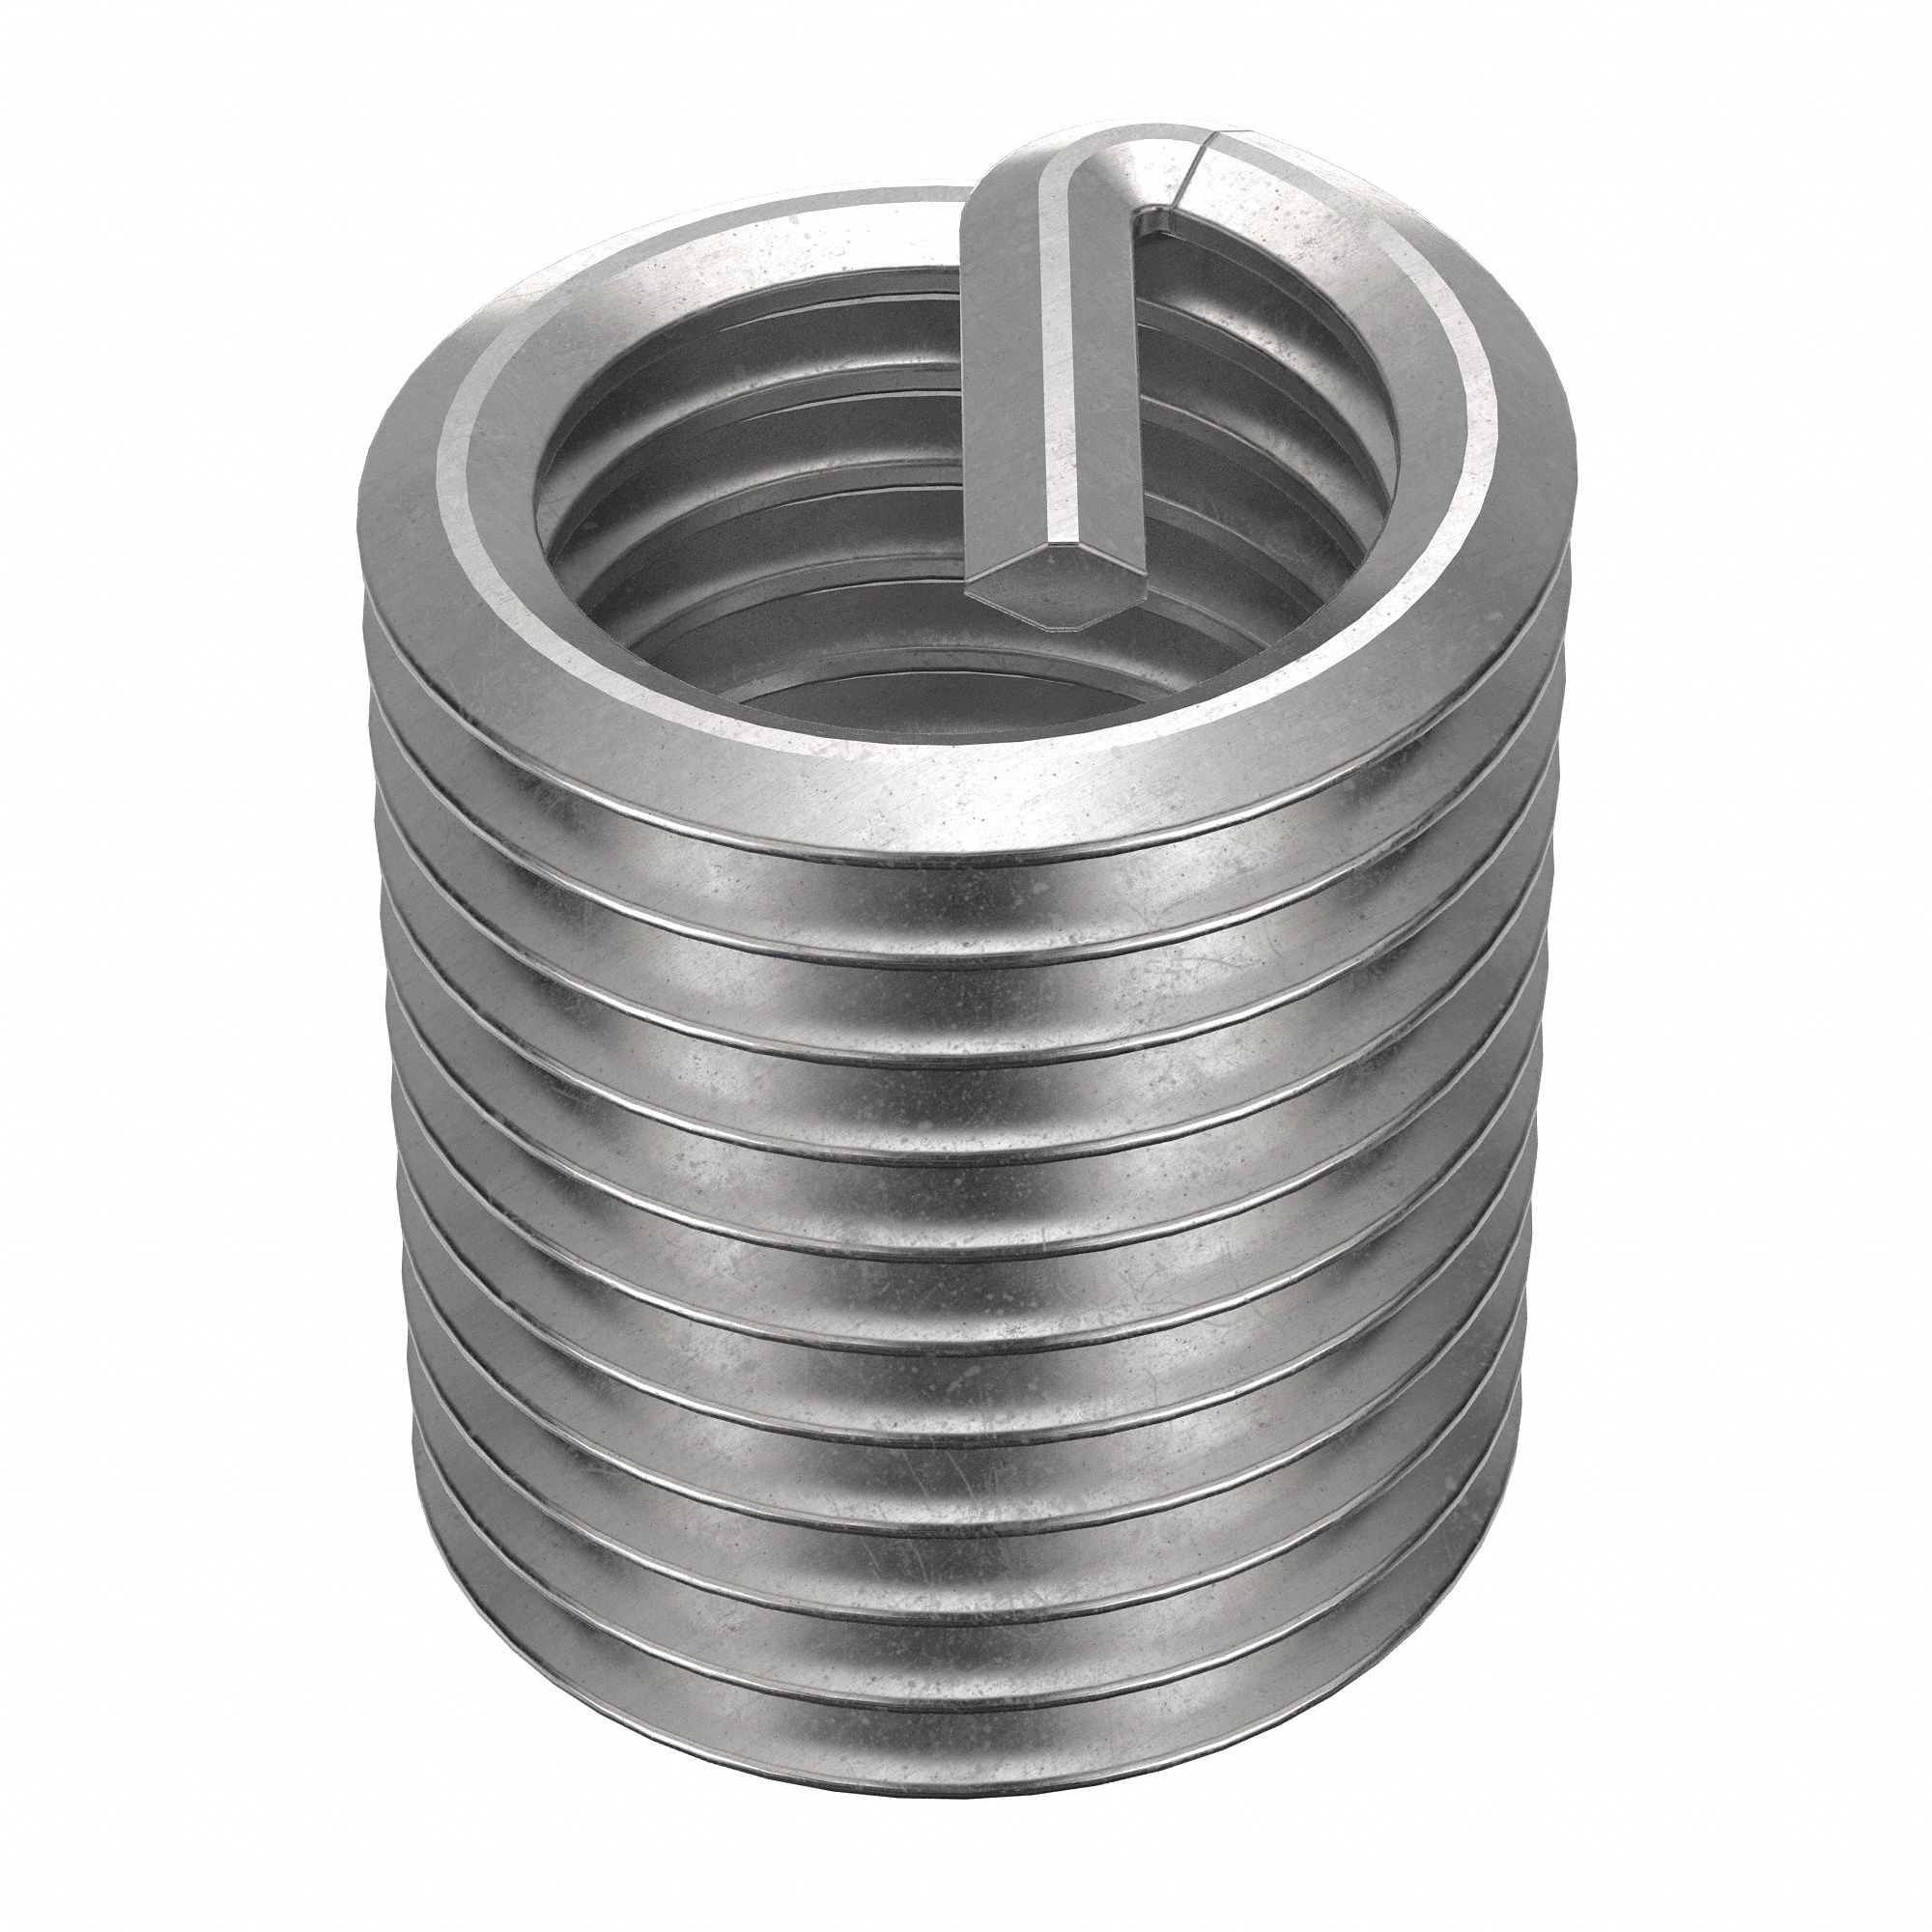 Stainless Steel Helicoil Thread Insert 1/4-20 x 2 Diameter Qty-100 